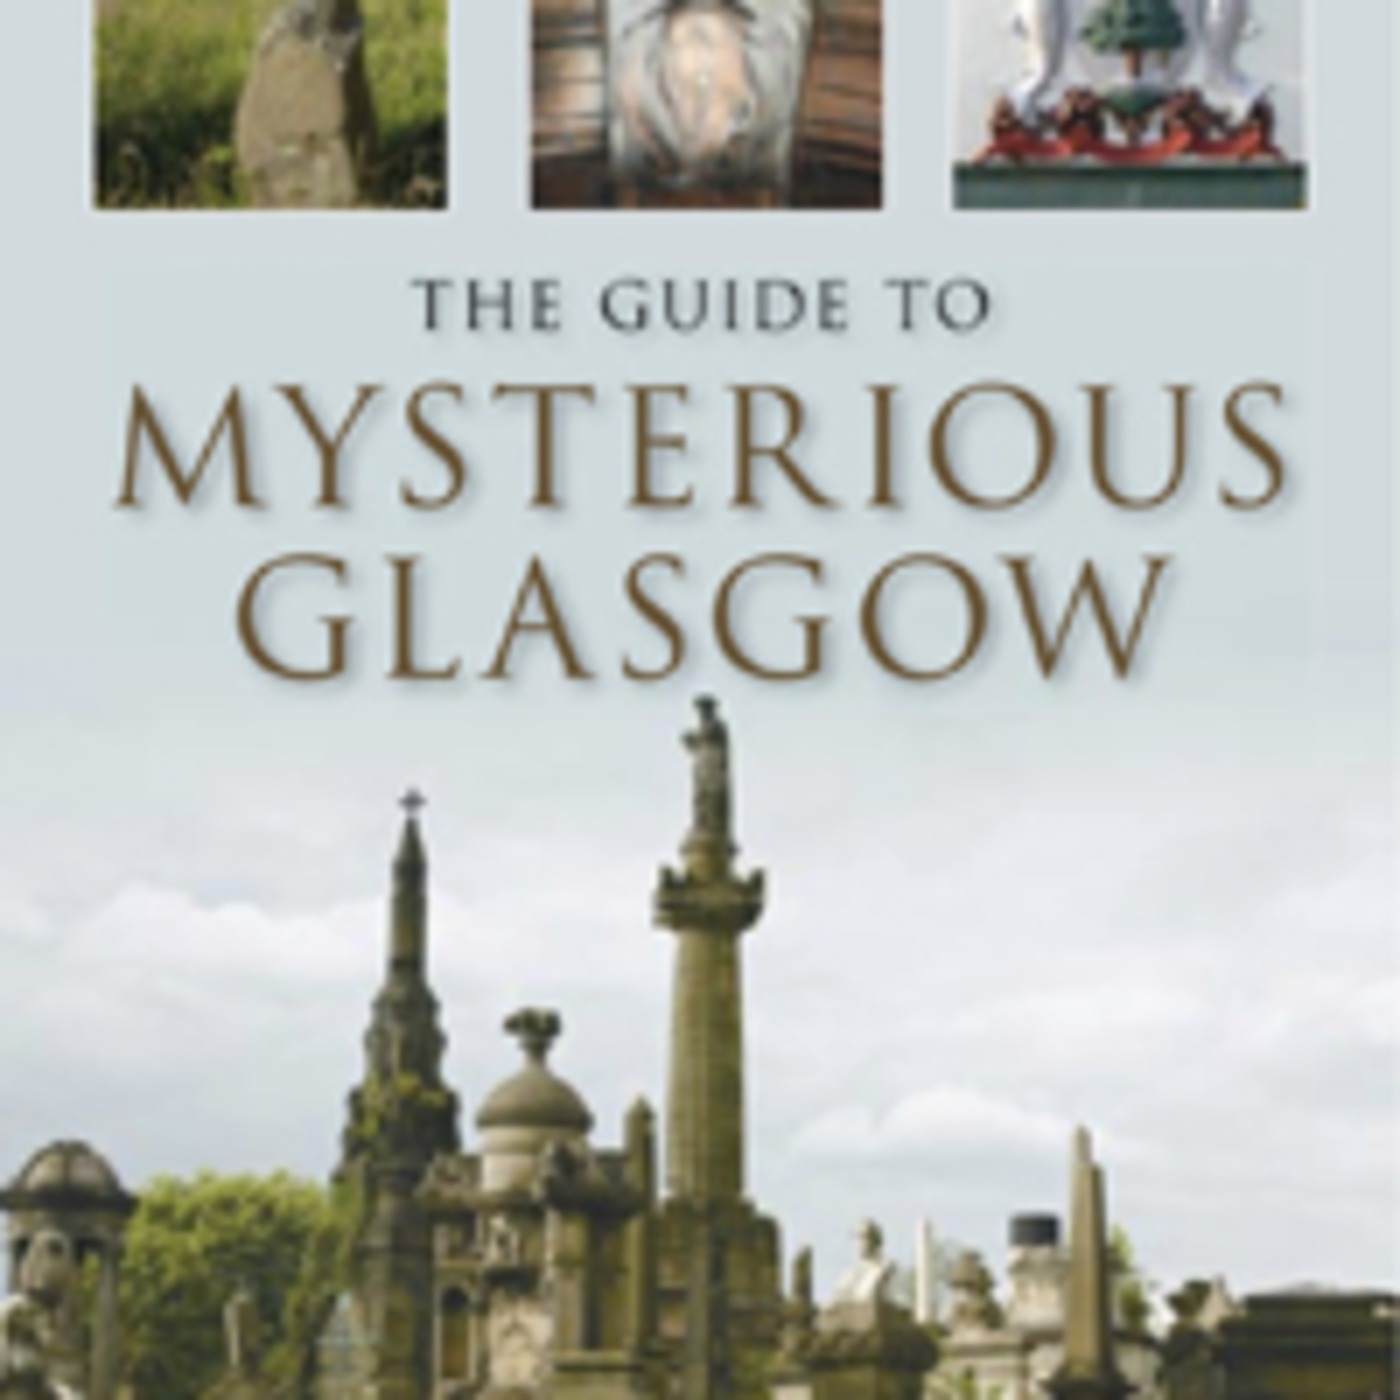 Q + A for Mysterious Glasgow in 2009